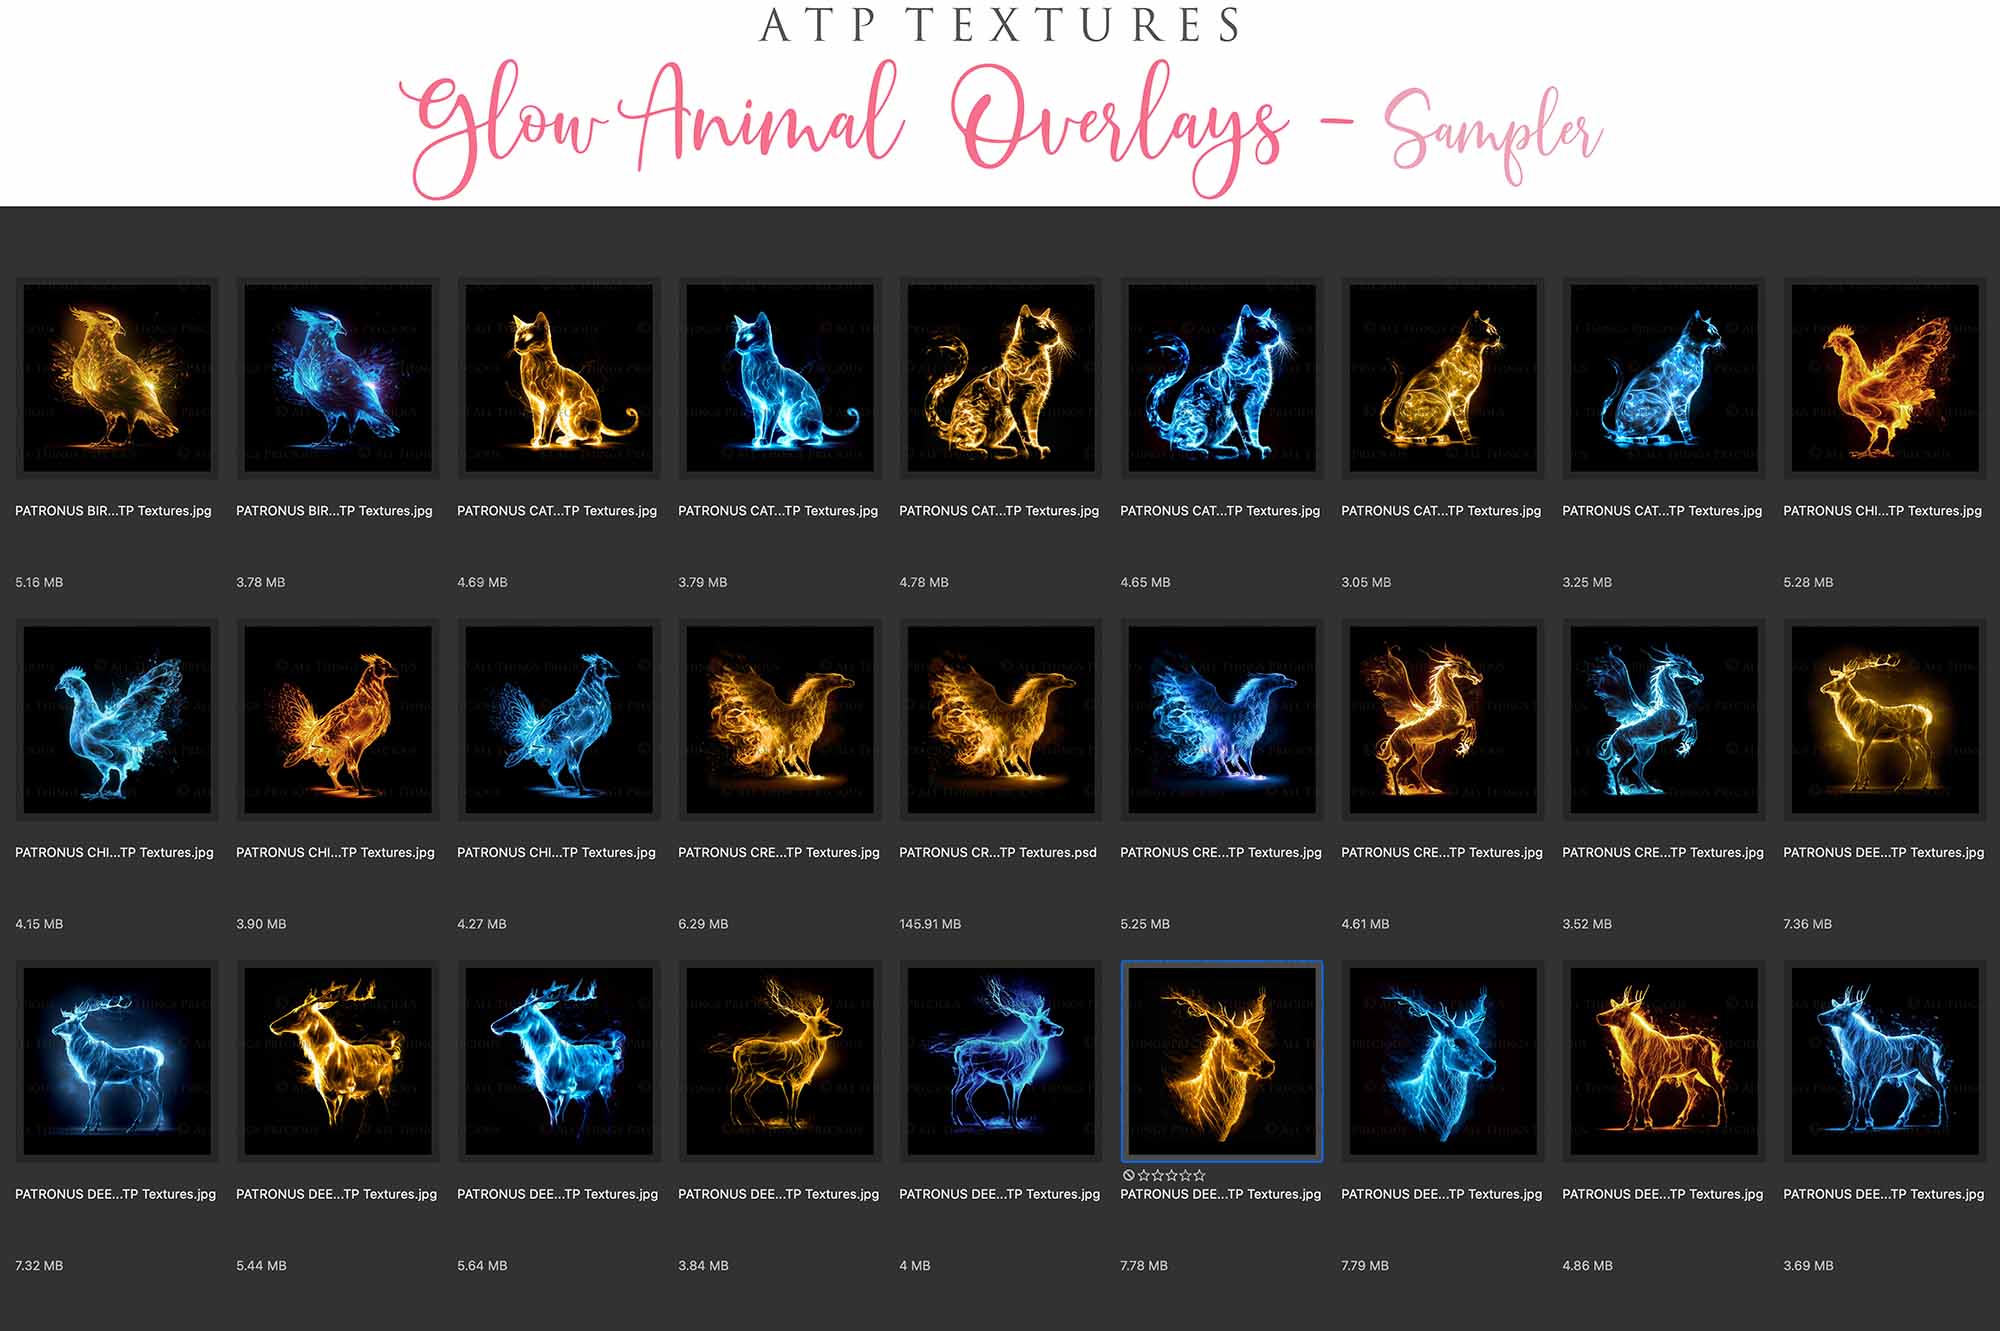 Glowing Patronus Animals. Glow overlays, 300dpi, Owl, Deer, Horse, Phoenix, Griffin. Atp textures, photo editing, Magical overlay. Harry Potter Photography. High resolution, digital download. Find more overlays, textures and Actions in my store. ATP Textures.